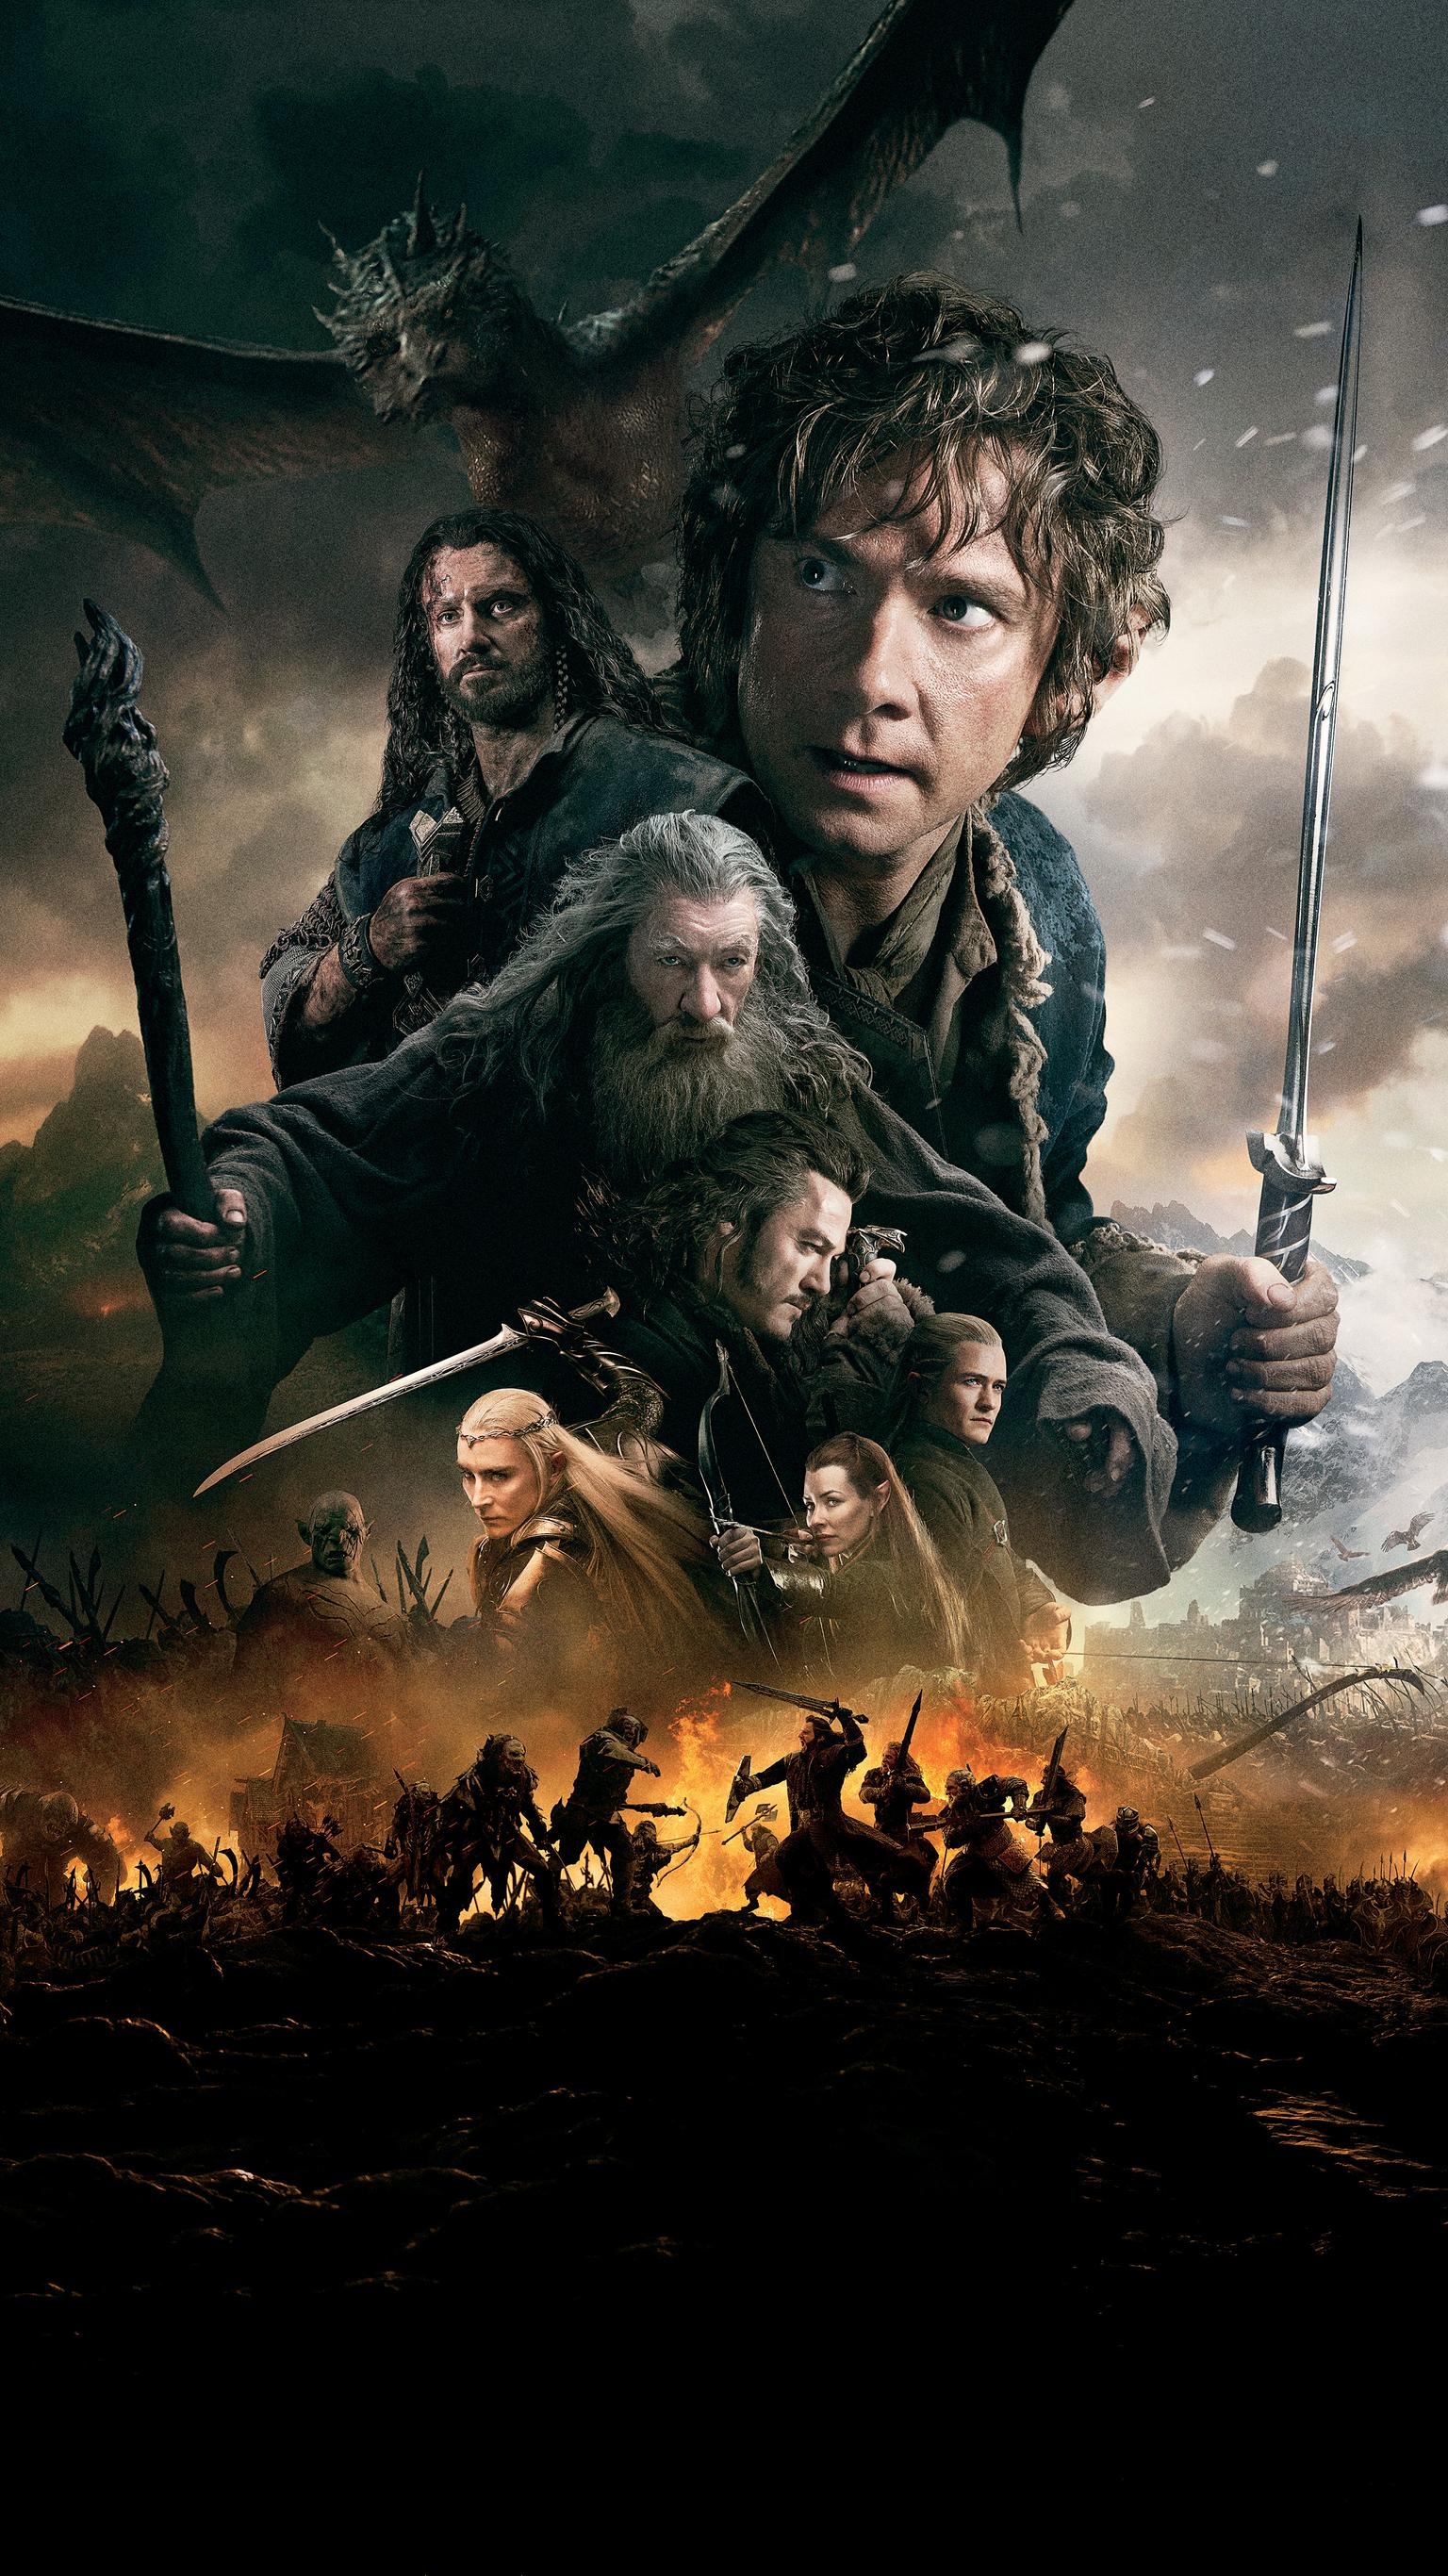 Battle of the Five Armies, Hobbit movie, Phone wallpapers, Hobbit phone backgrounds, 1540x2740 HD Phone